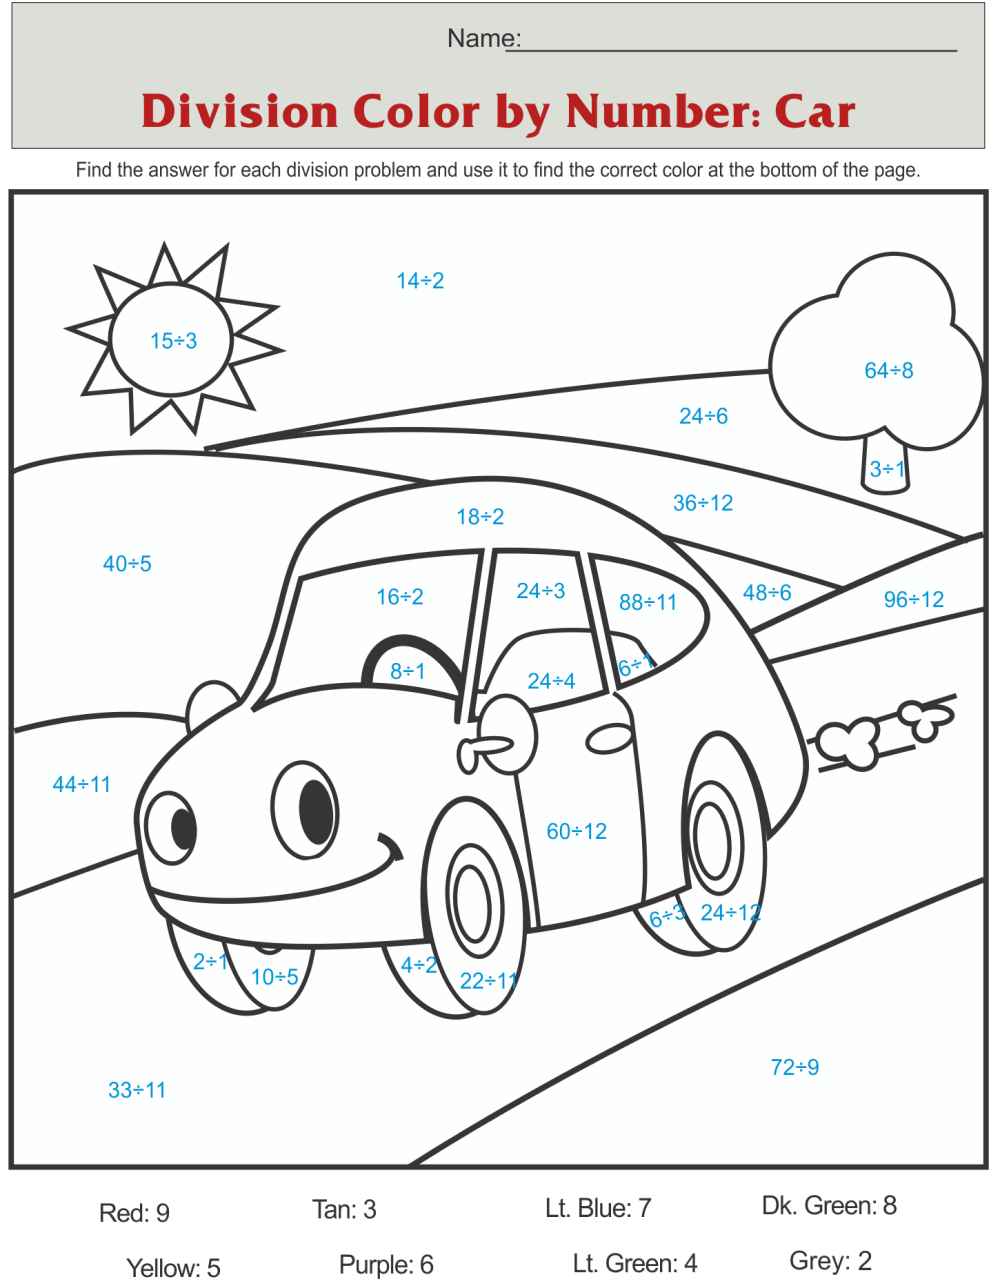 Car for baby color by number